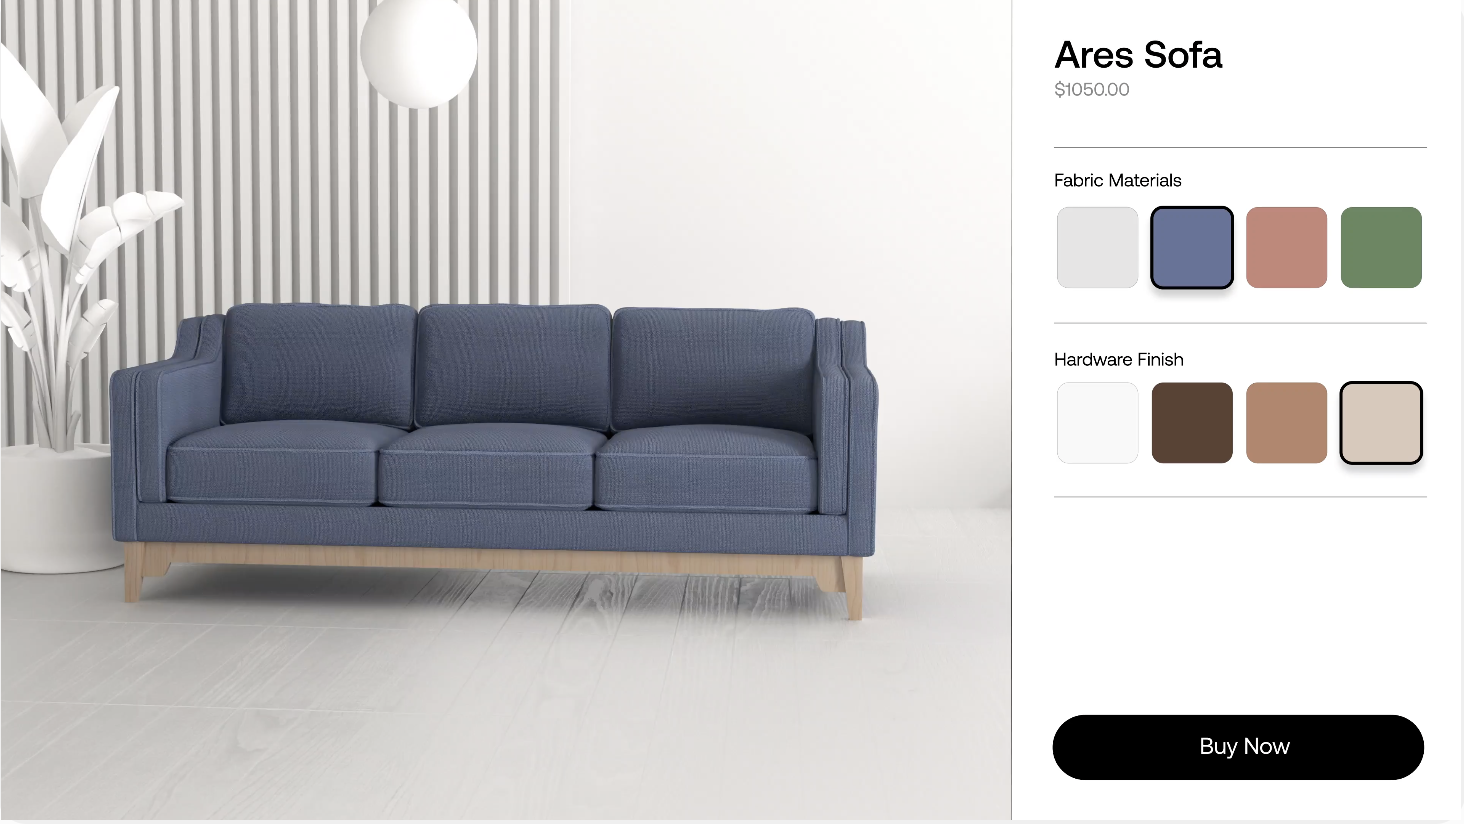 sofa customization options that shoppers can select in a Magento product configurator